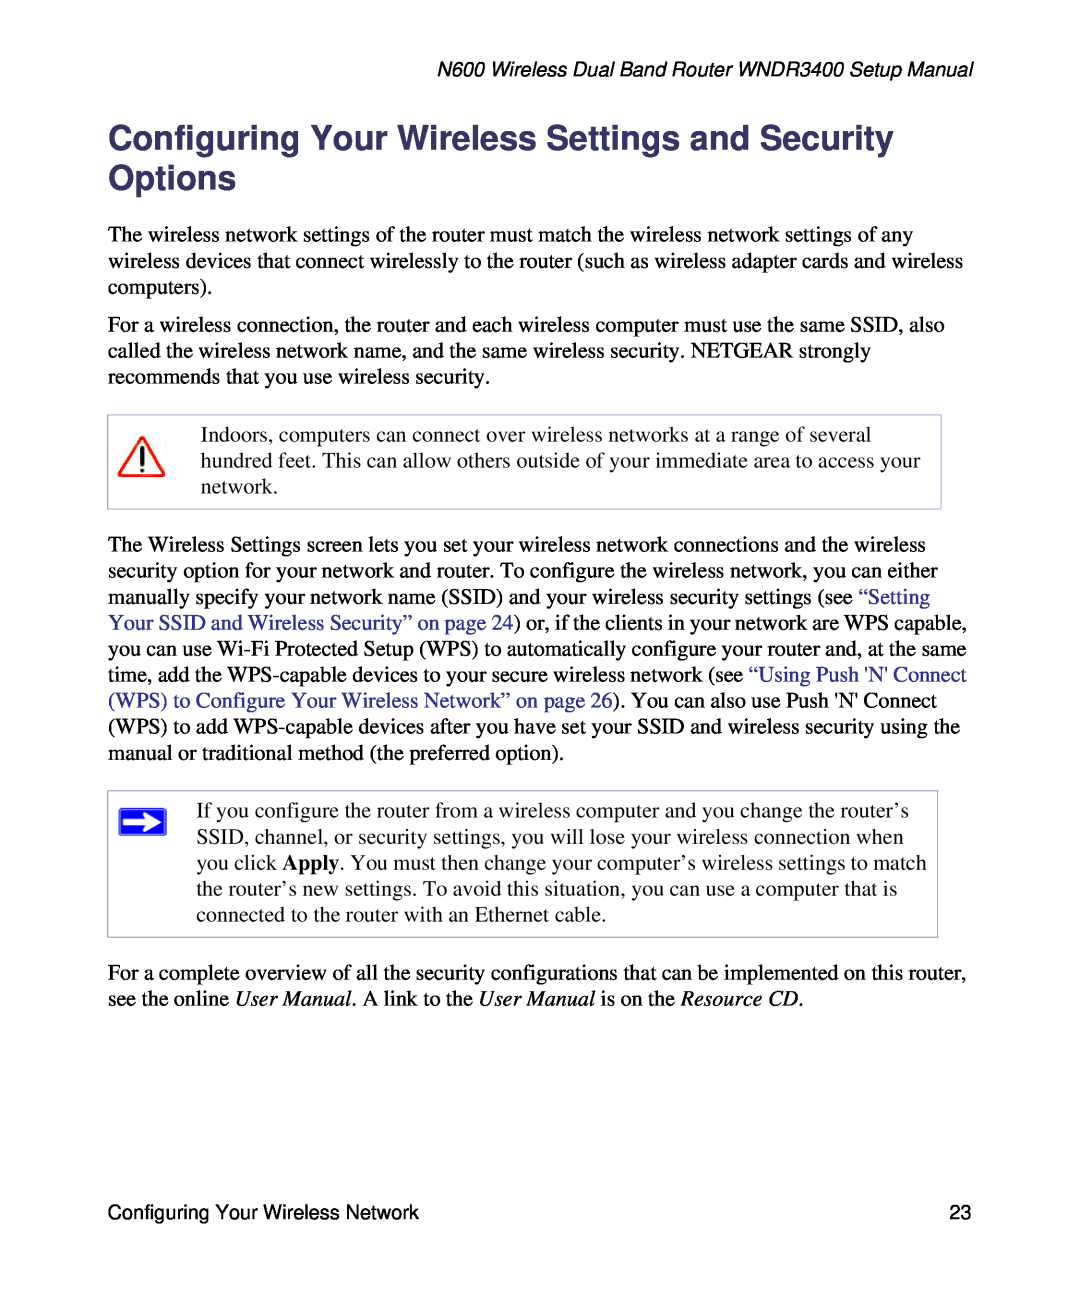 NETGEAR WNDR3400-100NAS manual Configuring Your Wireless Settings and Security Options 